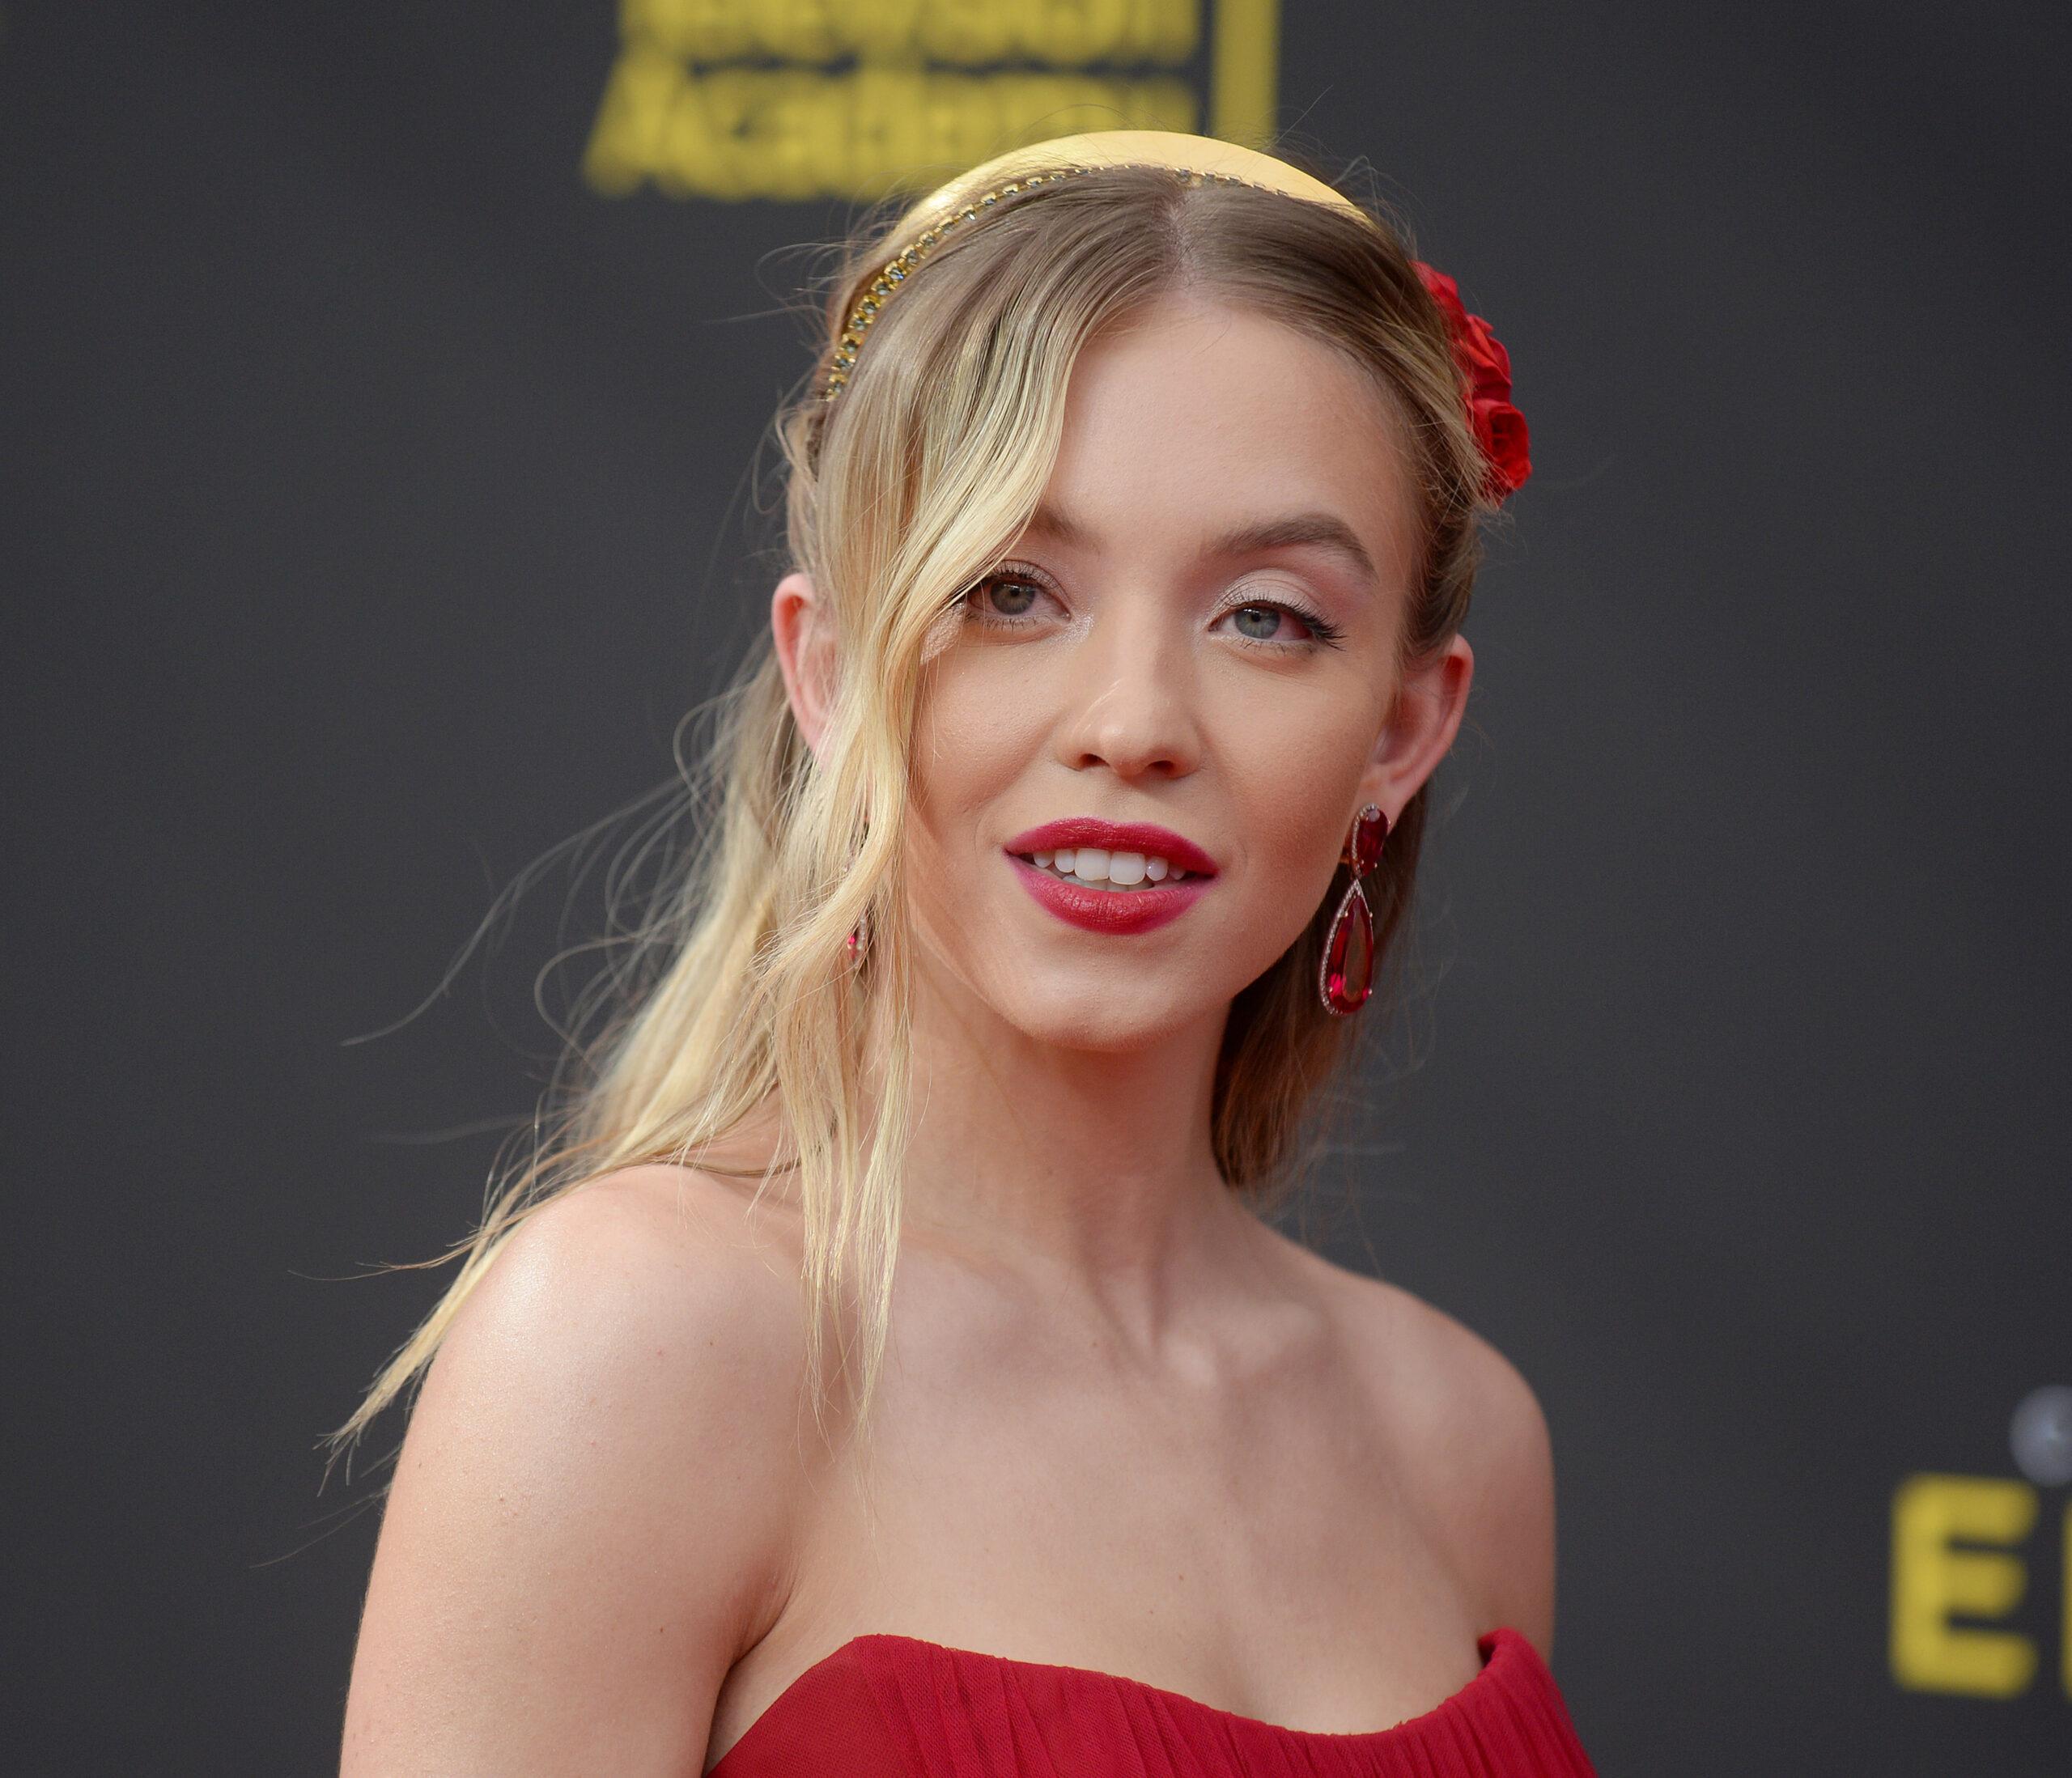 Sydney Sweeney says she considered getting a breast reduction at